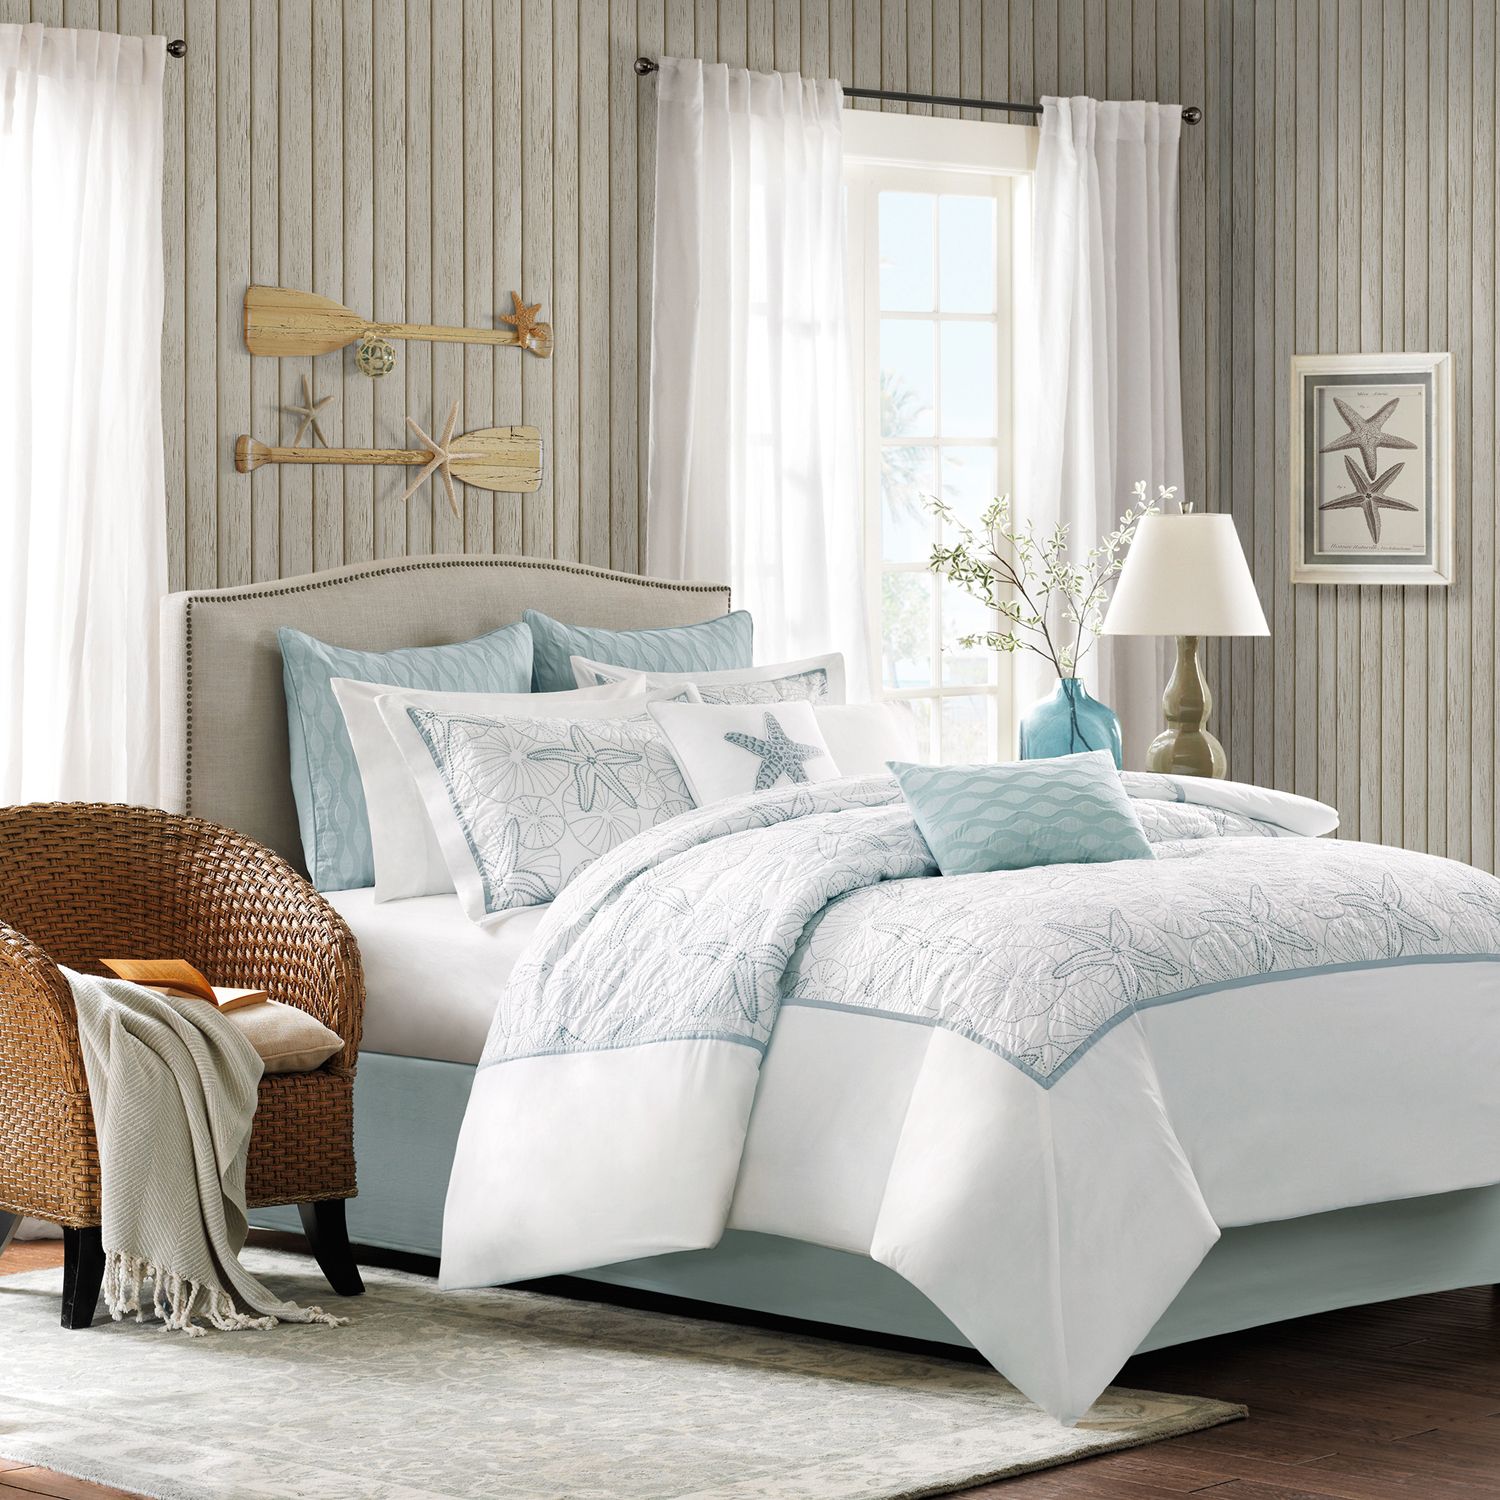 Image for Harbor House Maya Bay Bedding Collection at Kohl's.